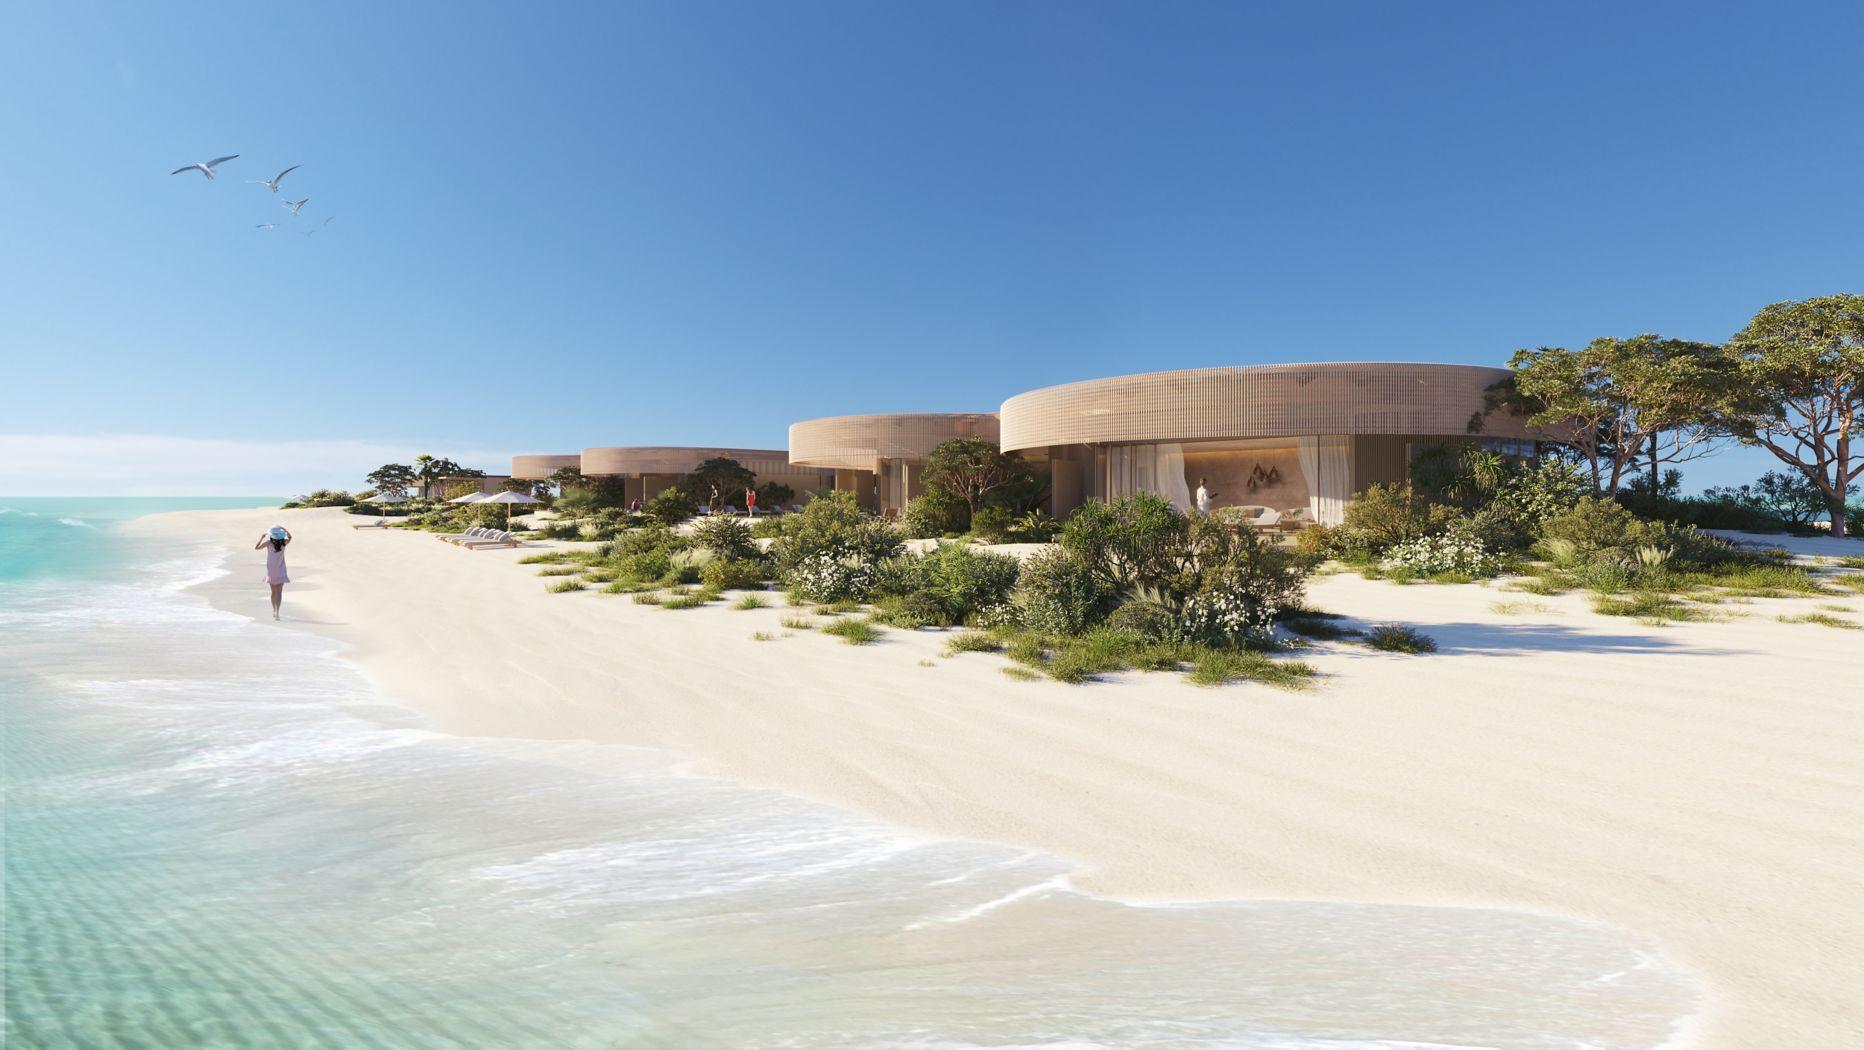 Nujuma, a Ritz-Carlton Reserve is taking bookings for stays in May